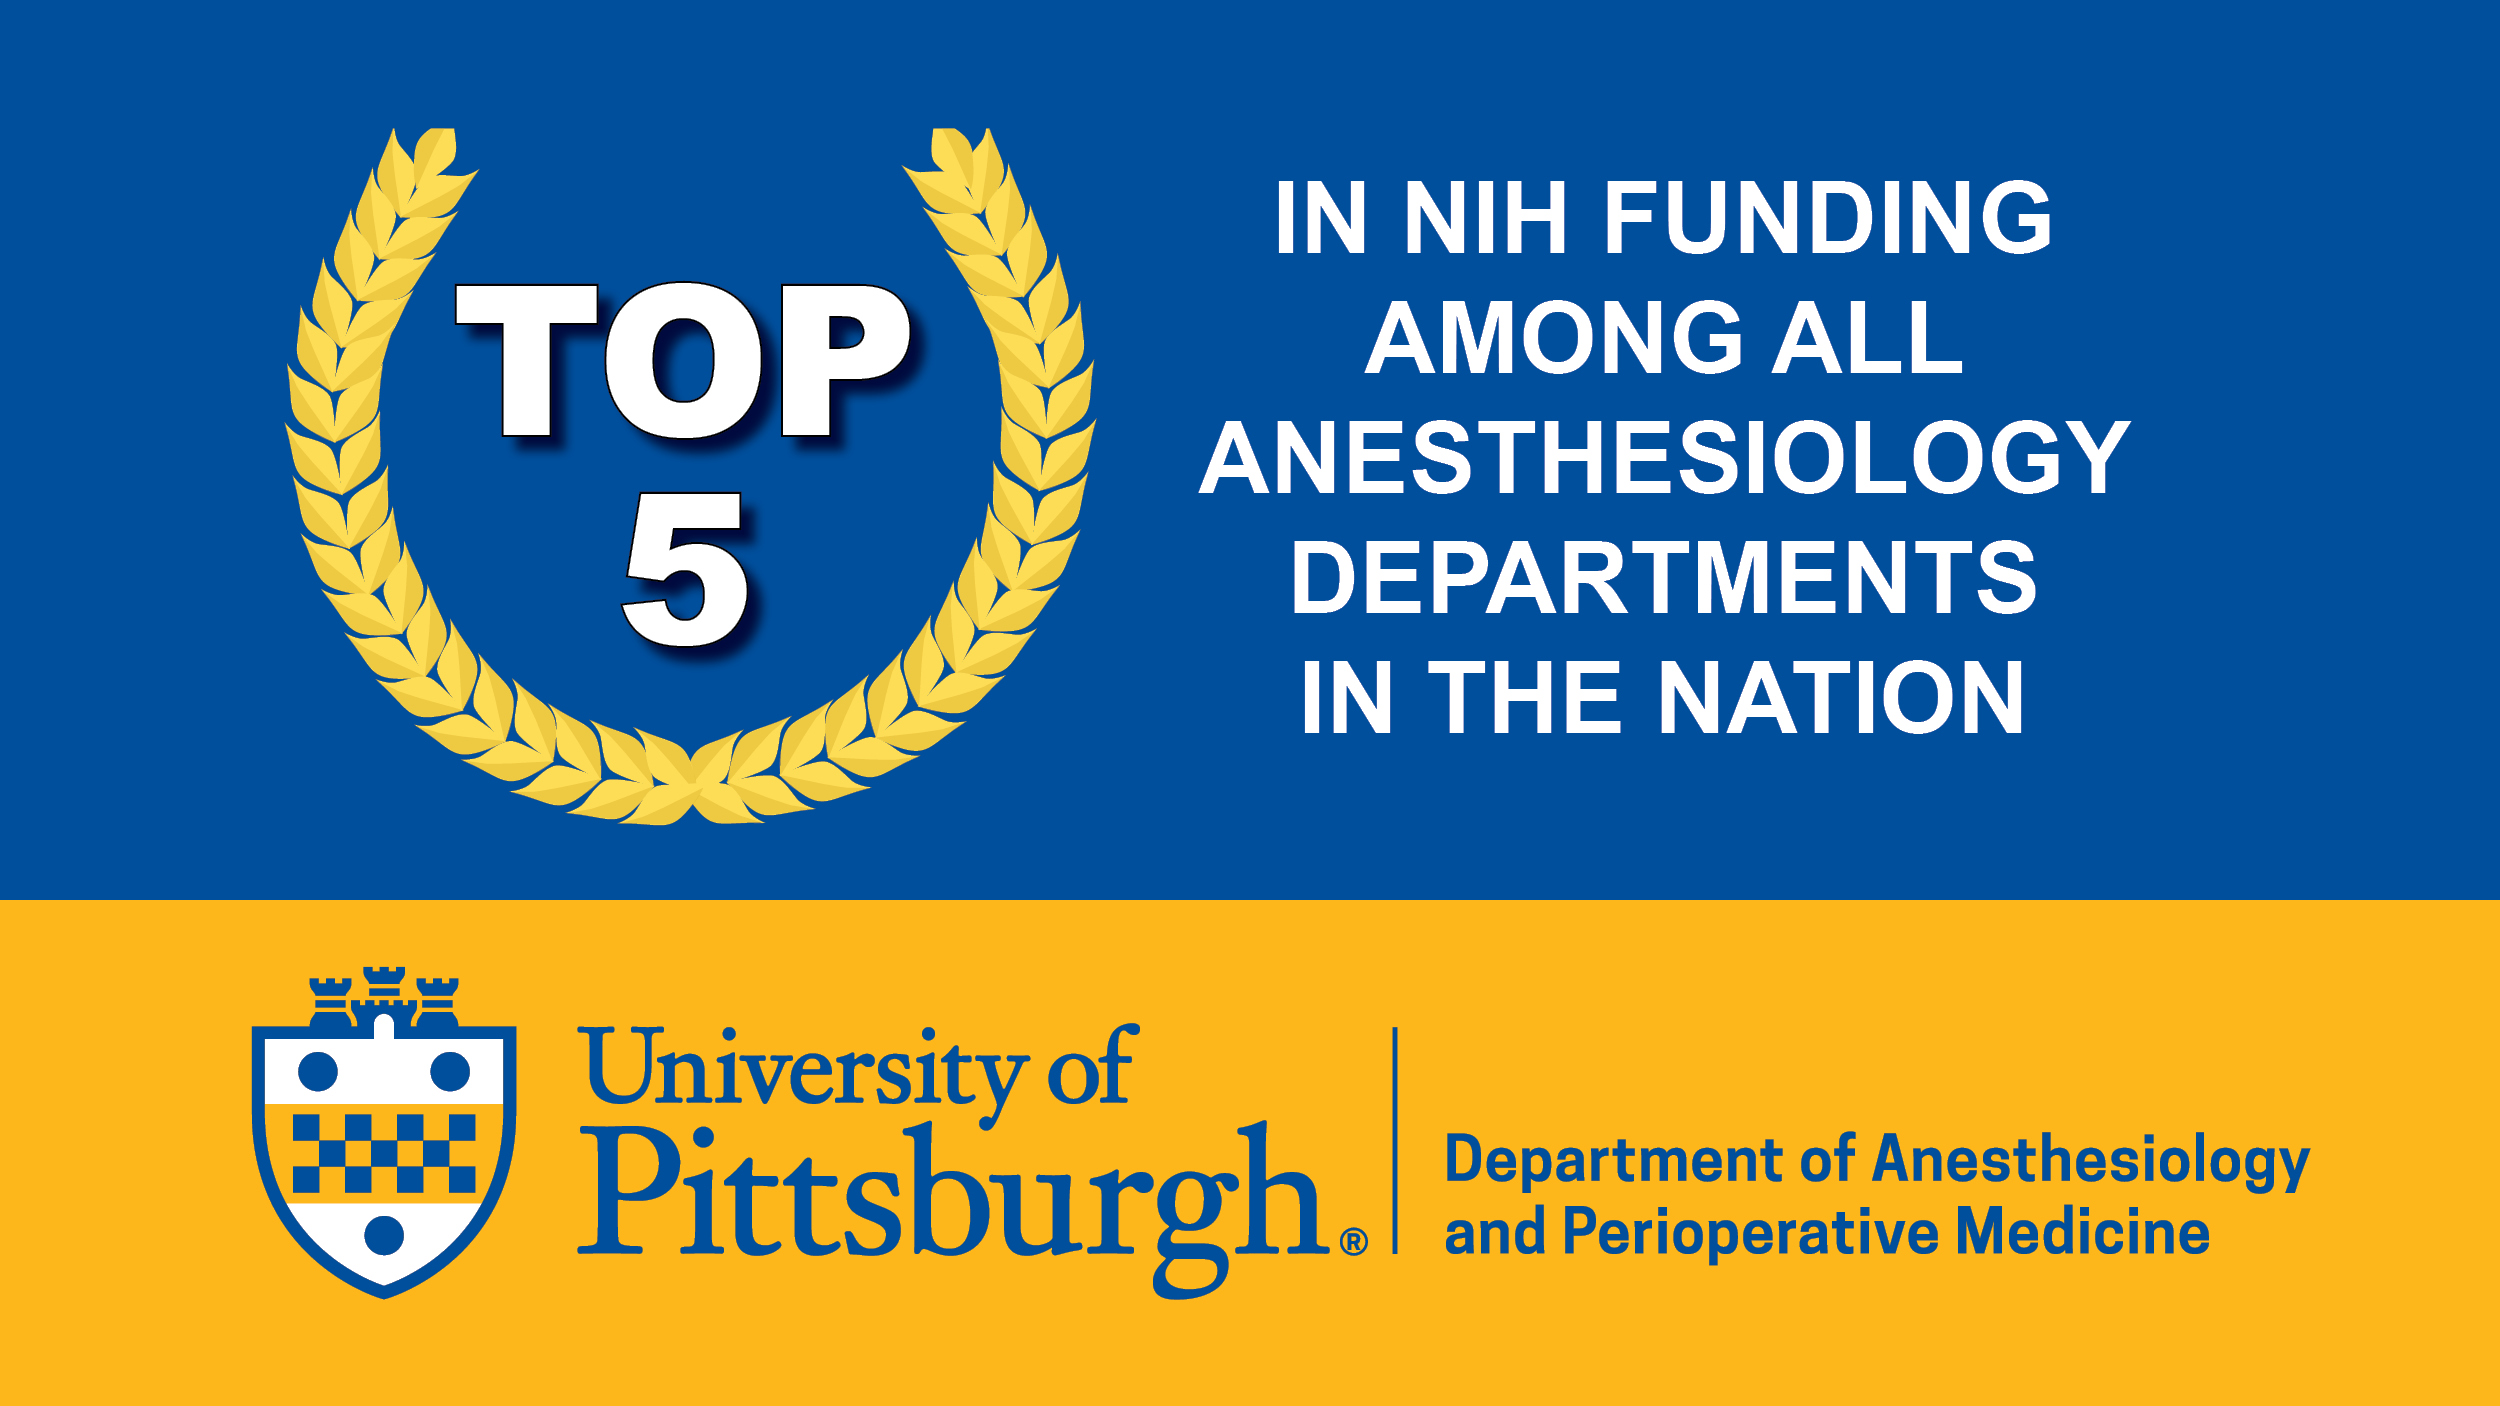 "A graphic depicting the University of Pittsburgh department of anesthesiology and perioperative medicine in the top 5 anesthesiology departments in the nation"